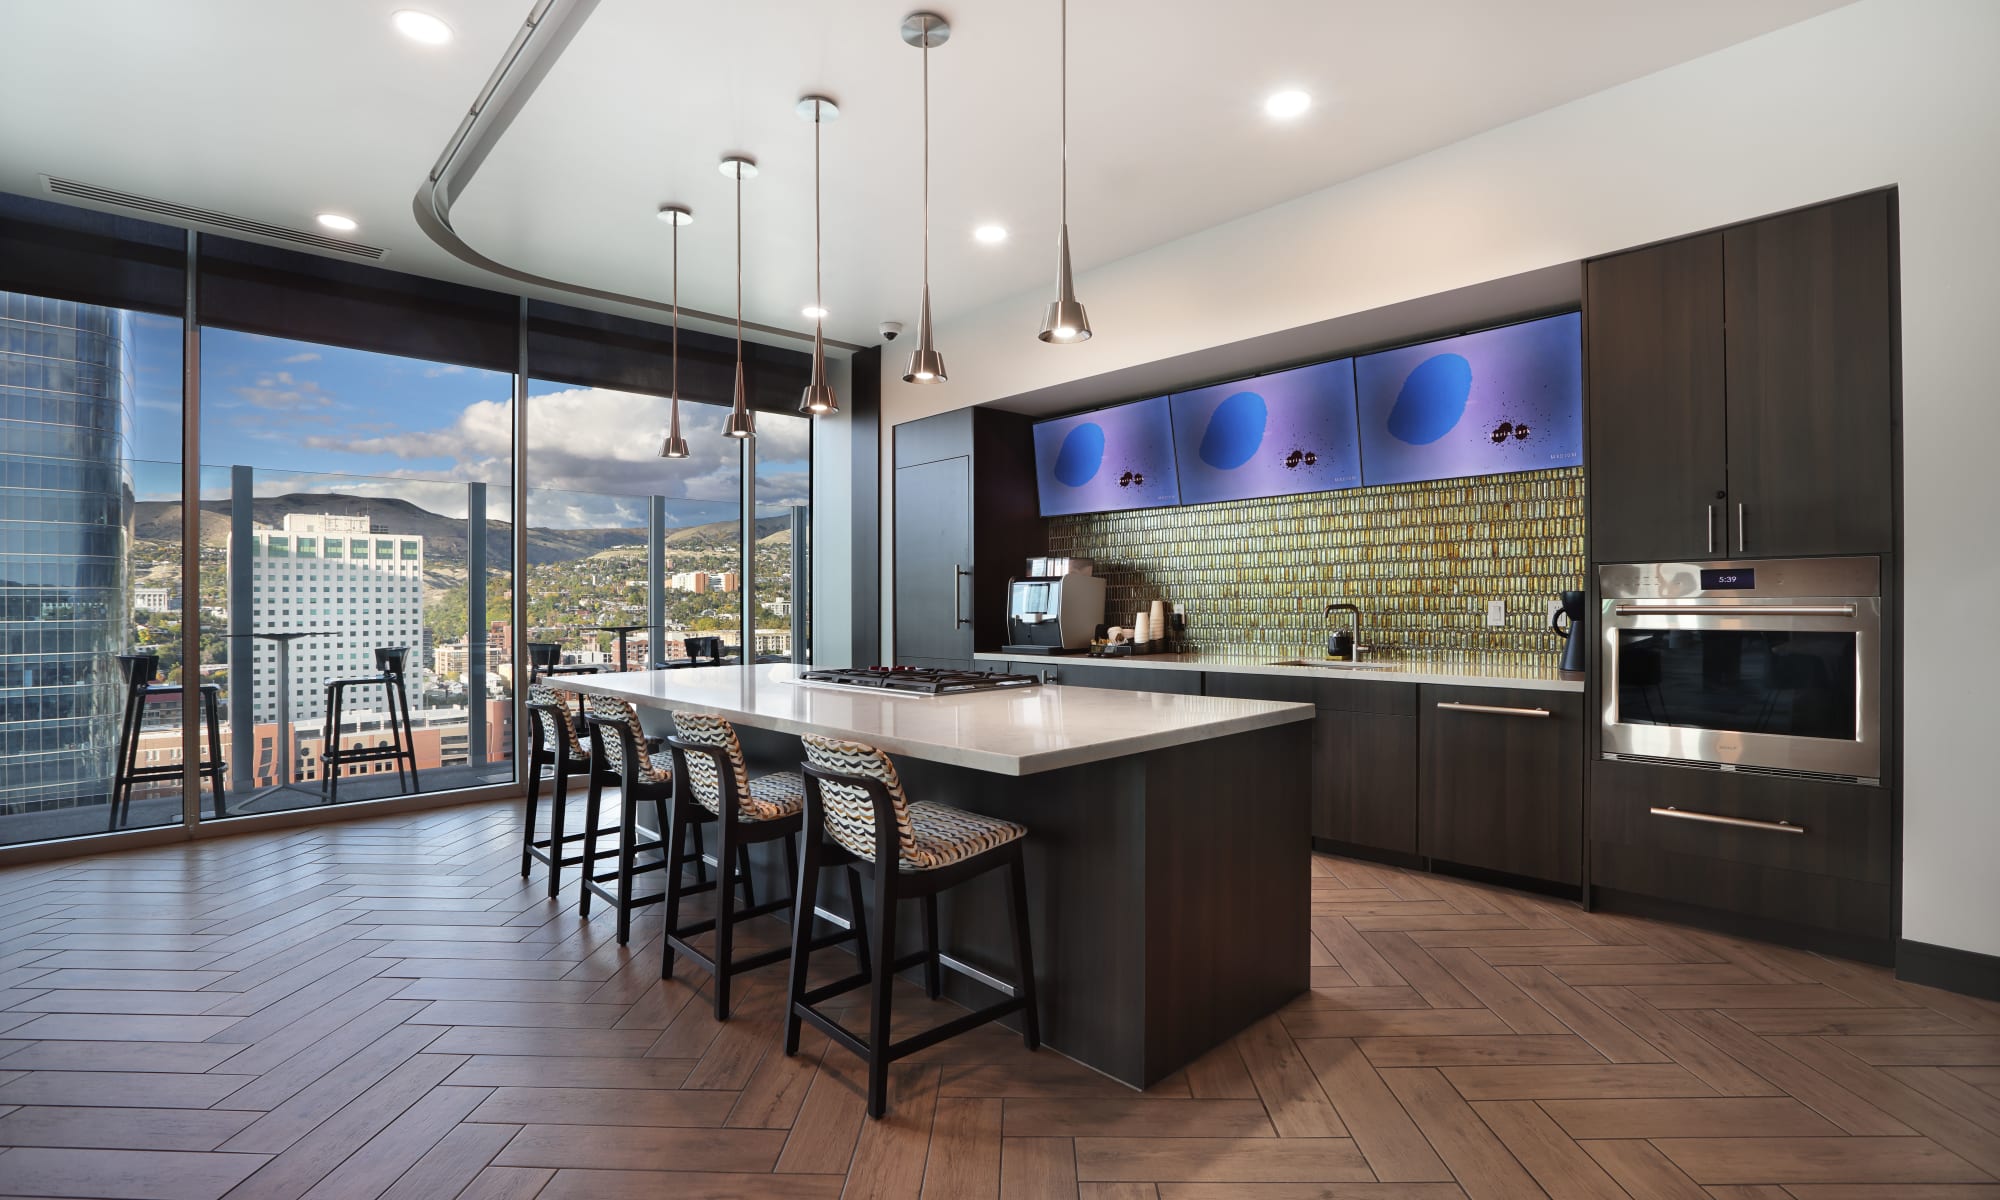 Rooftop clubroom kitchen with island and barstools at Luxury high-rise community of Liberty SKY in Salt Lake City, Utah